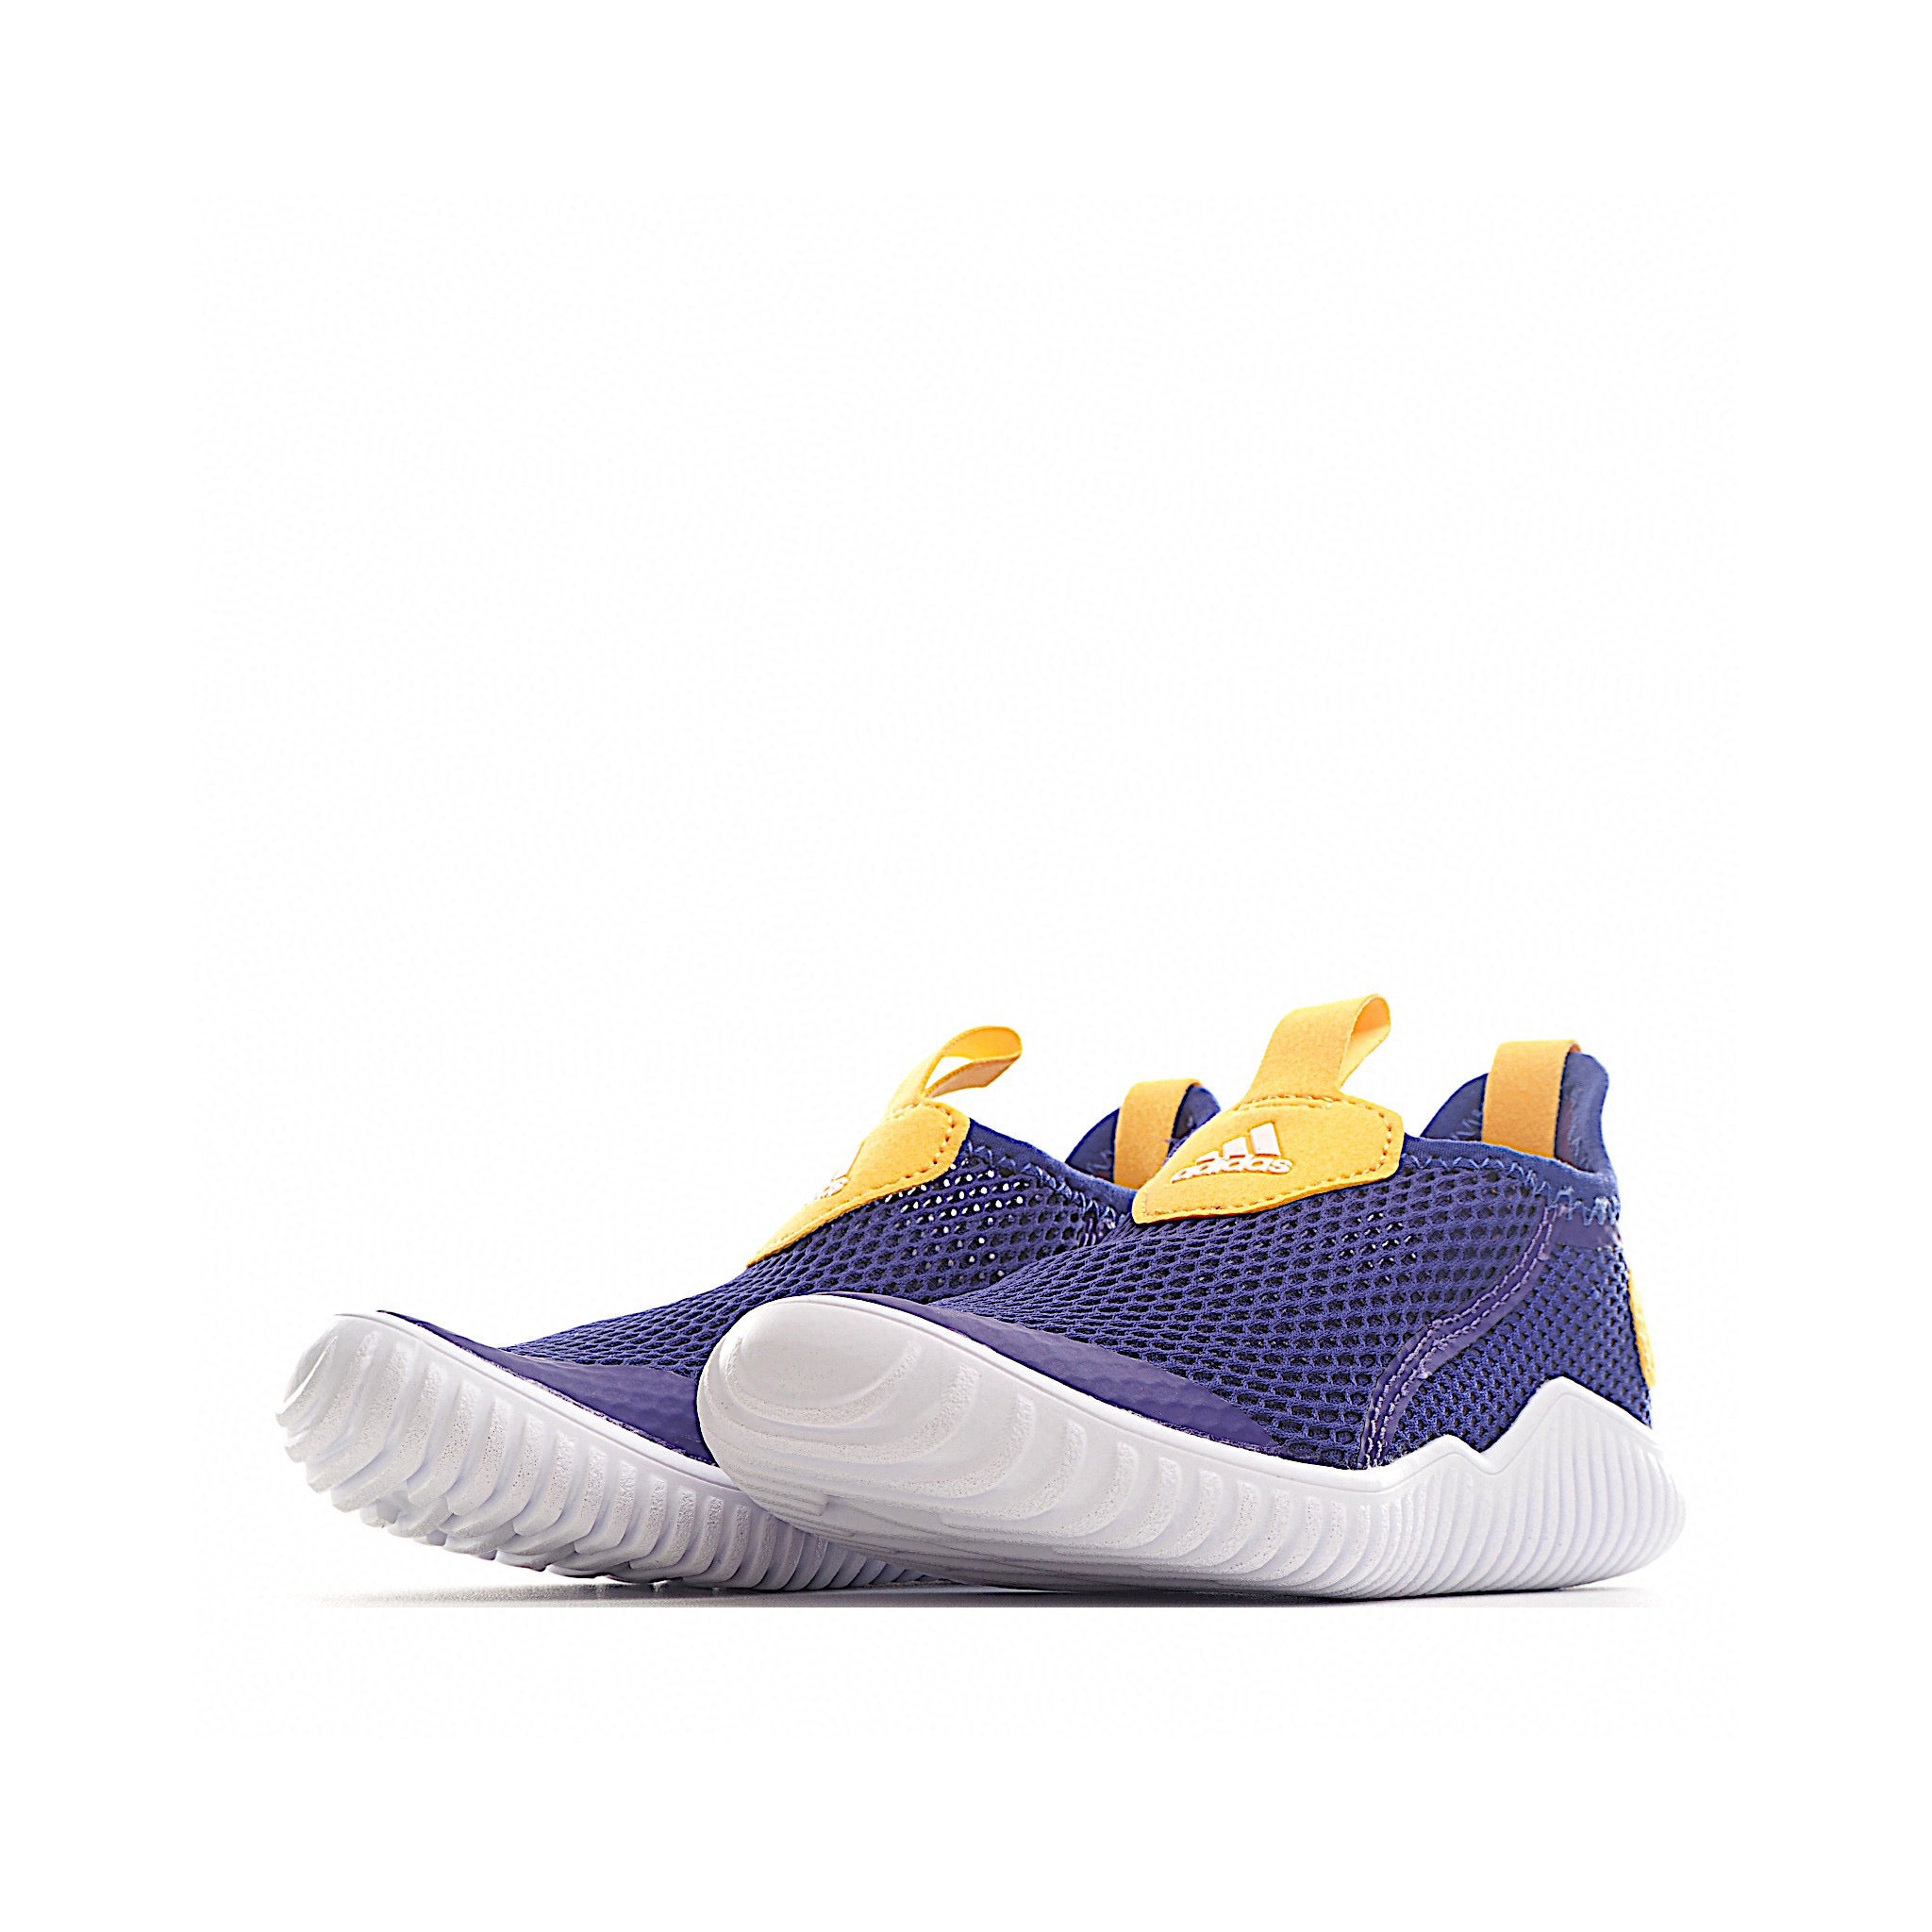 Adidas blue/yellow shoes